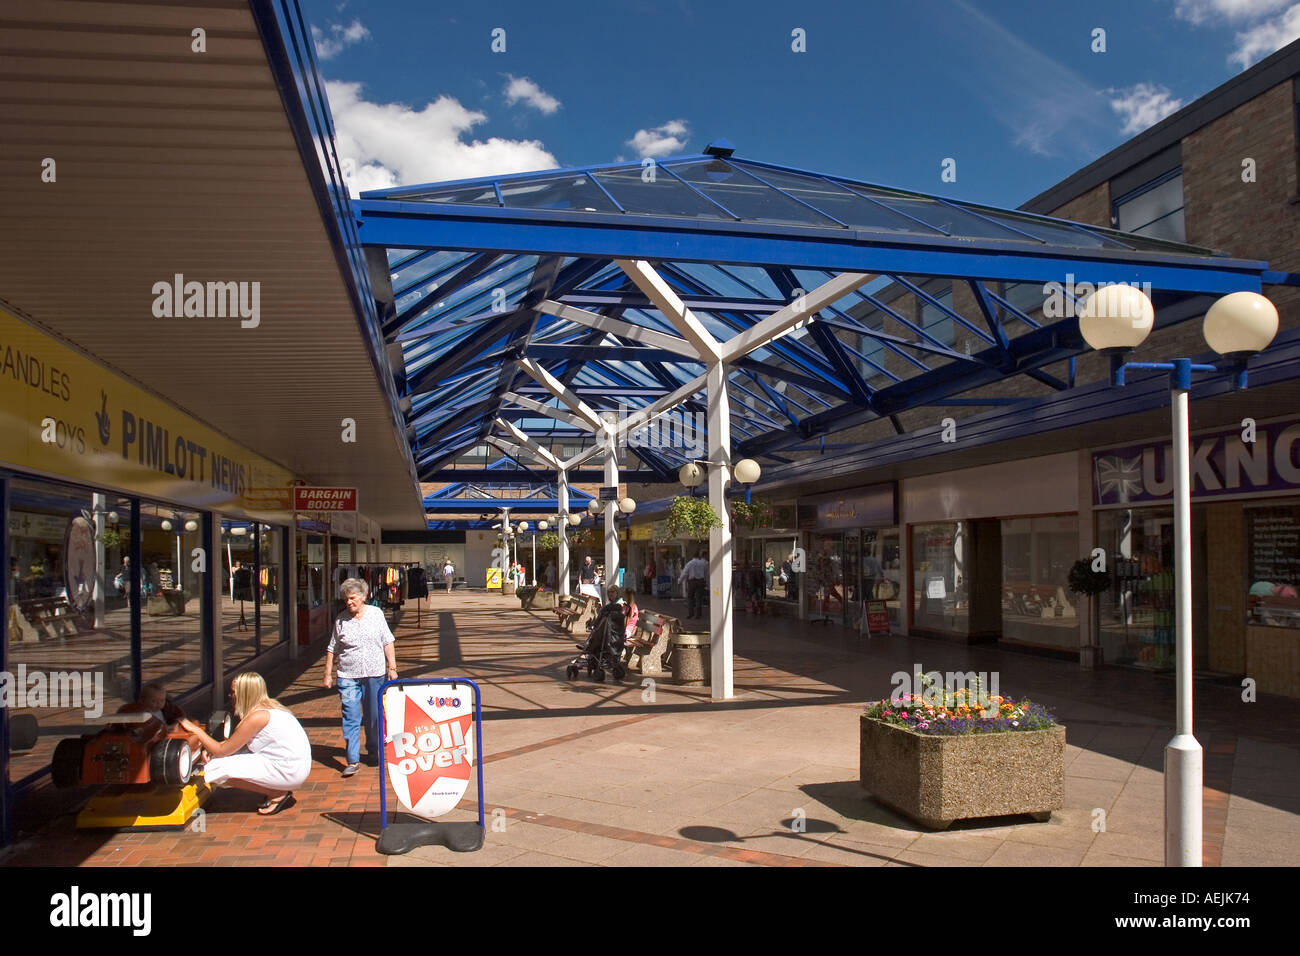 England Cheshire Stockport Cheadle Hulme Station Road shopping centre Stock Photo